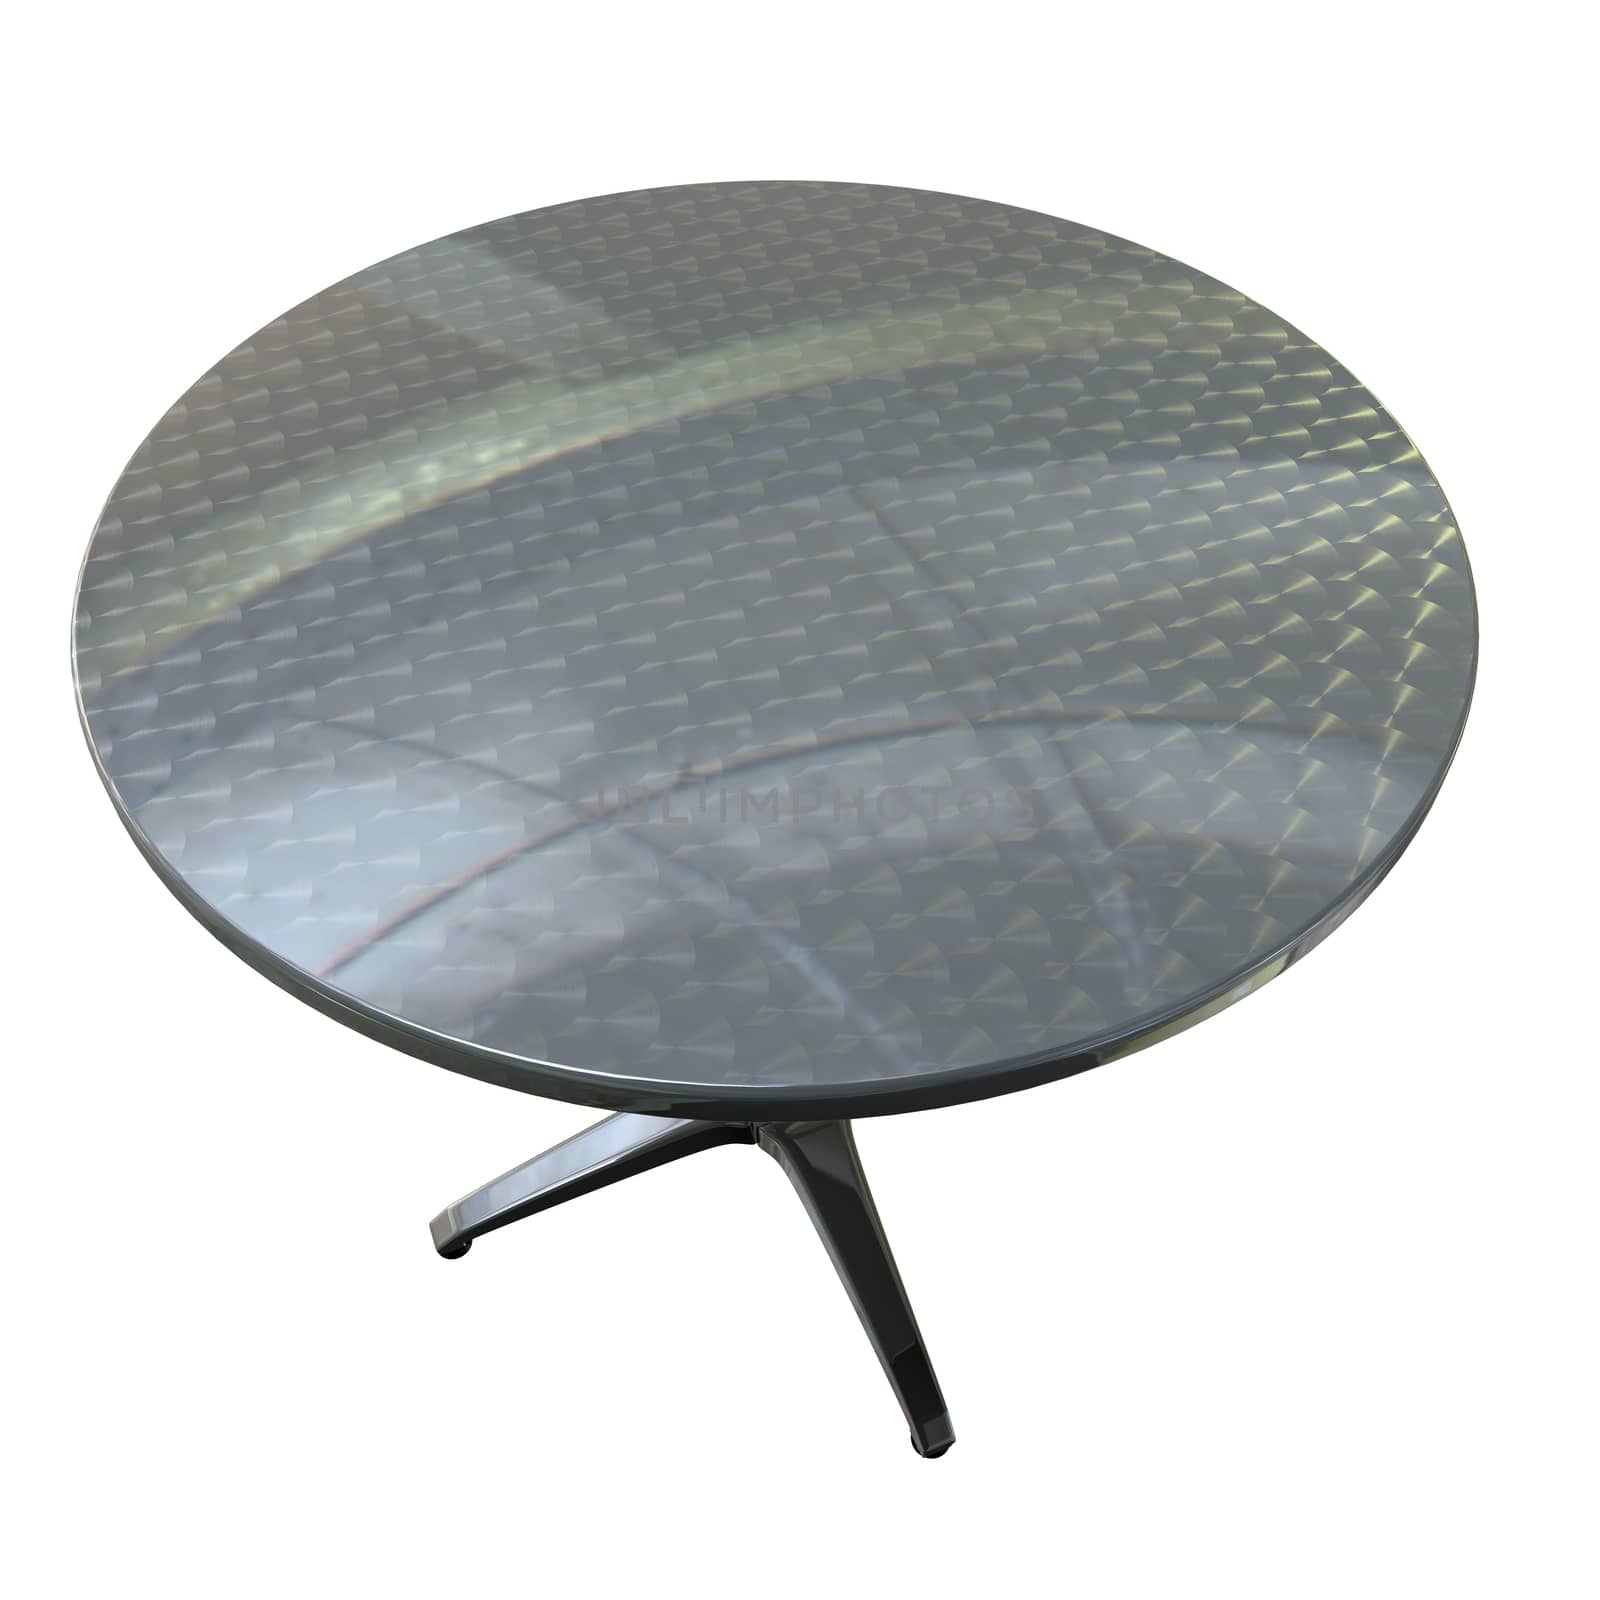 the top of a round planar chrome table on white background